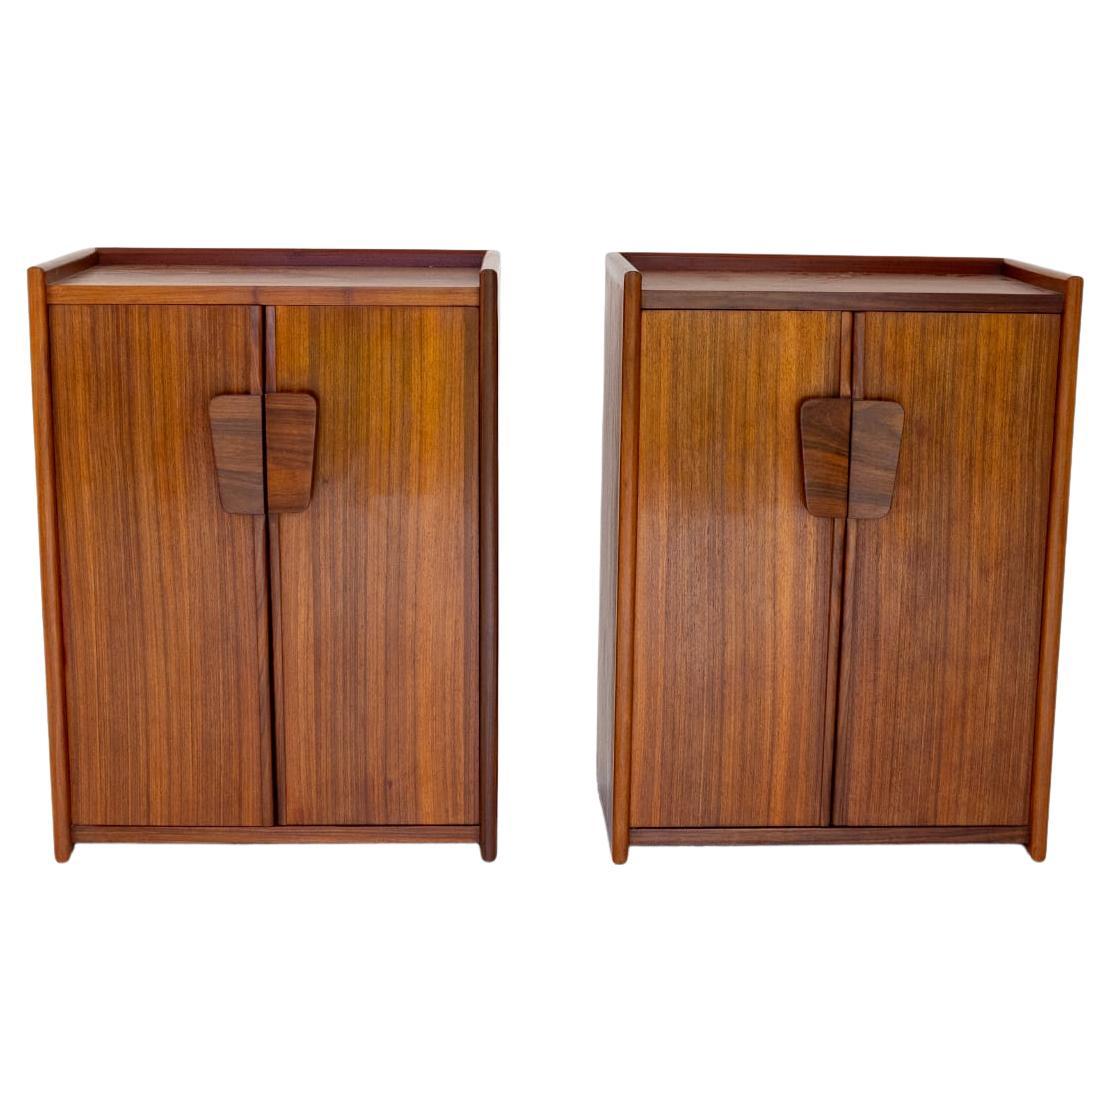 Mid-Century Modern Pair of Wood Buffets Cabinets. Italy, 1950s